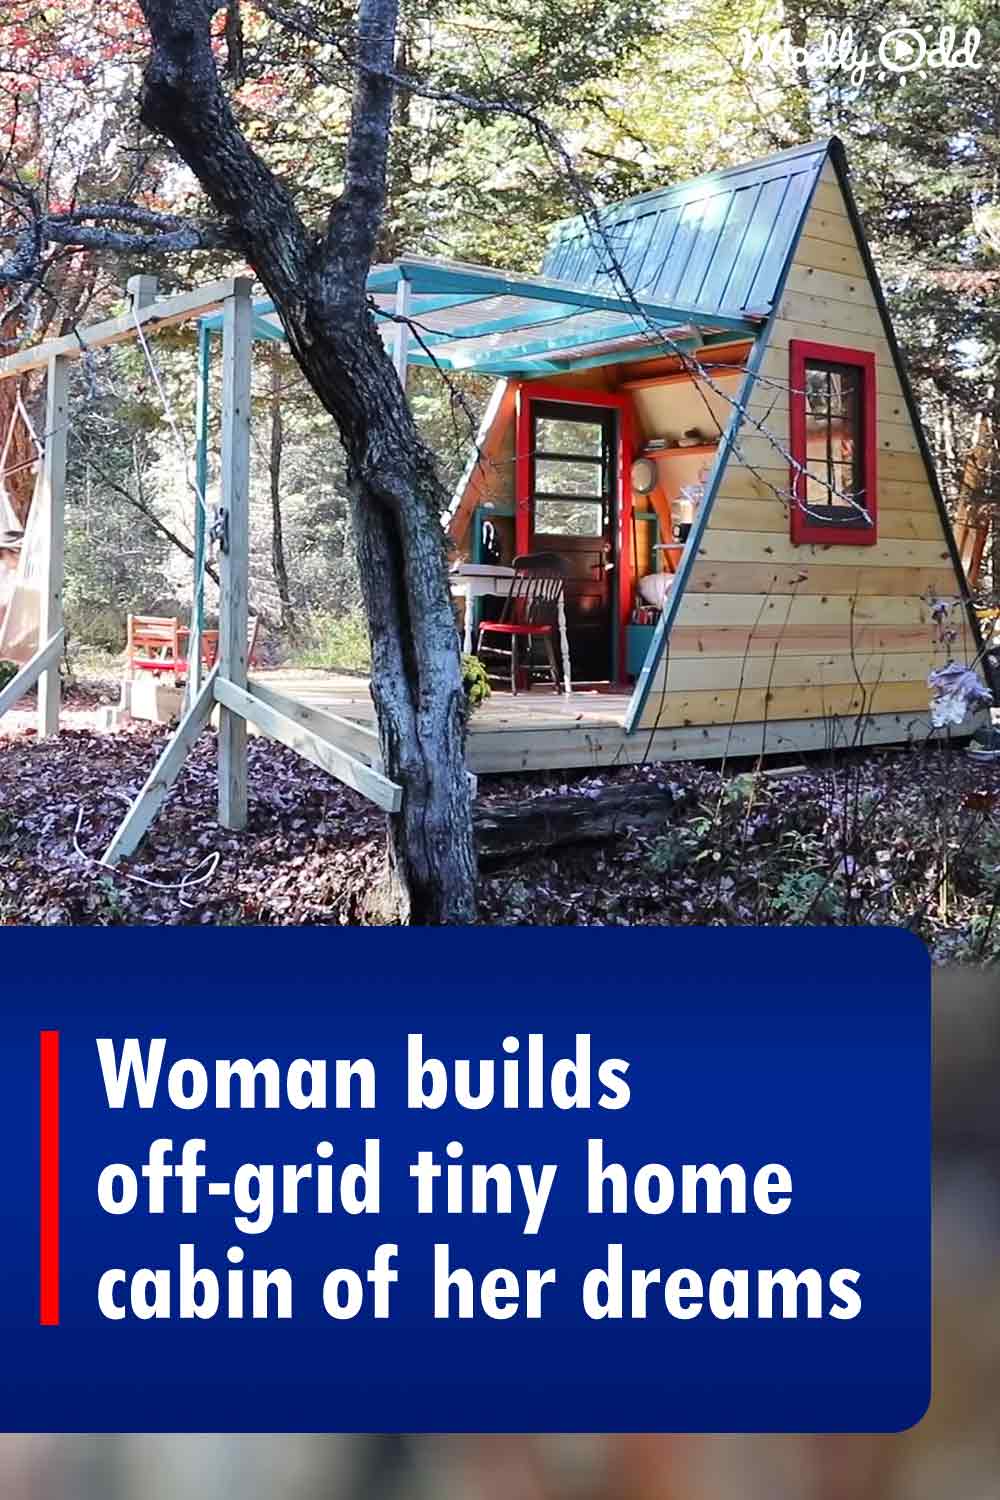 Woman builds off-grid tiny home cabin of her dreams